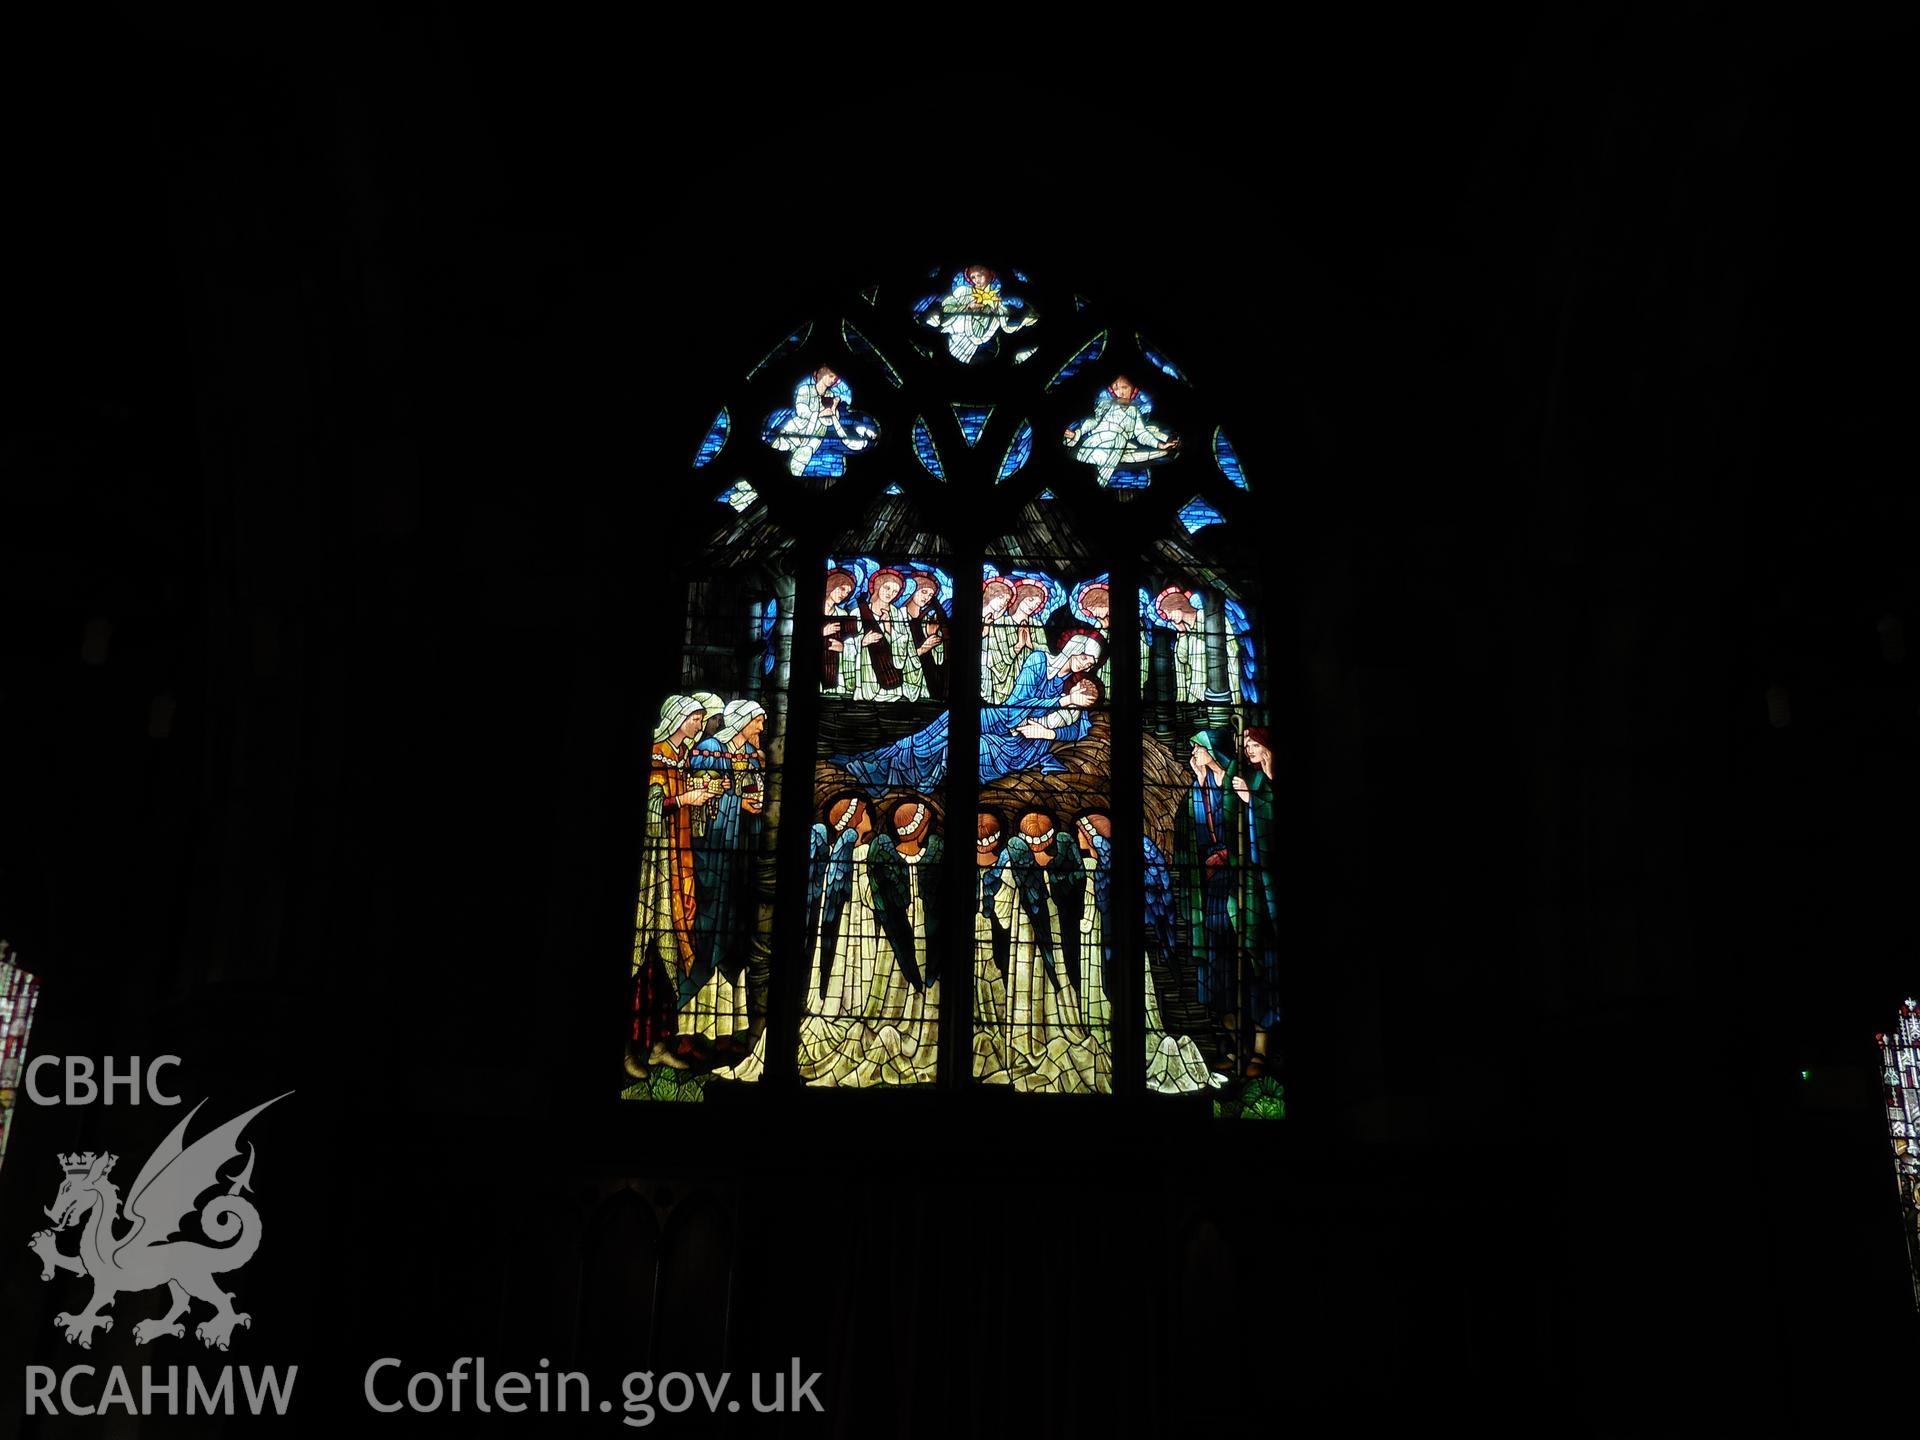 Colour digital photograph showing stained glass window in St Deiniol's church, Hawarden, taken in March 2022.